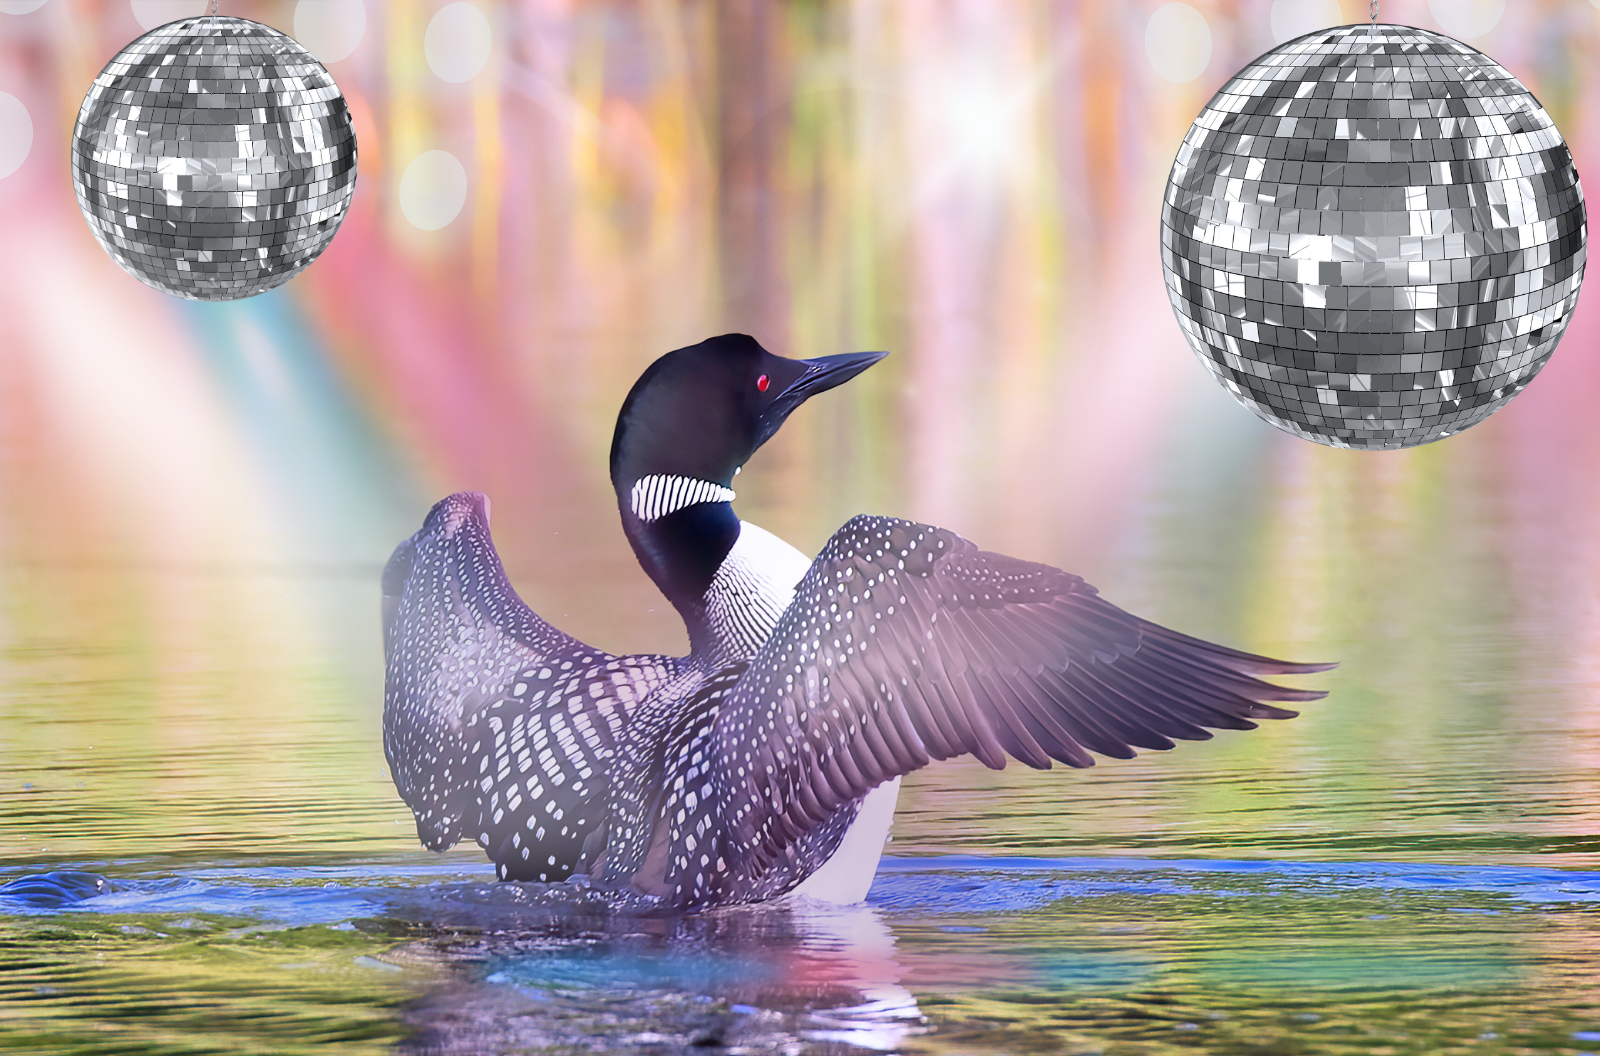 A loon spreading its wings in water, with photoshopped disco balls and club lights above it.